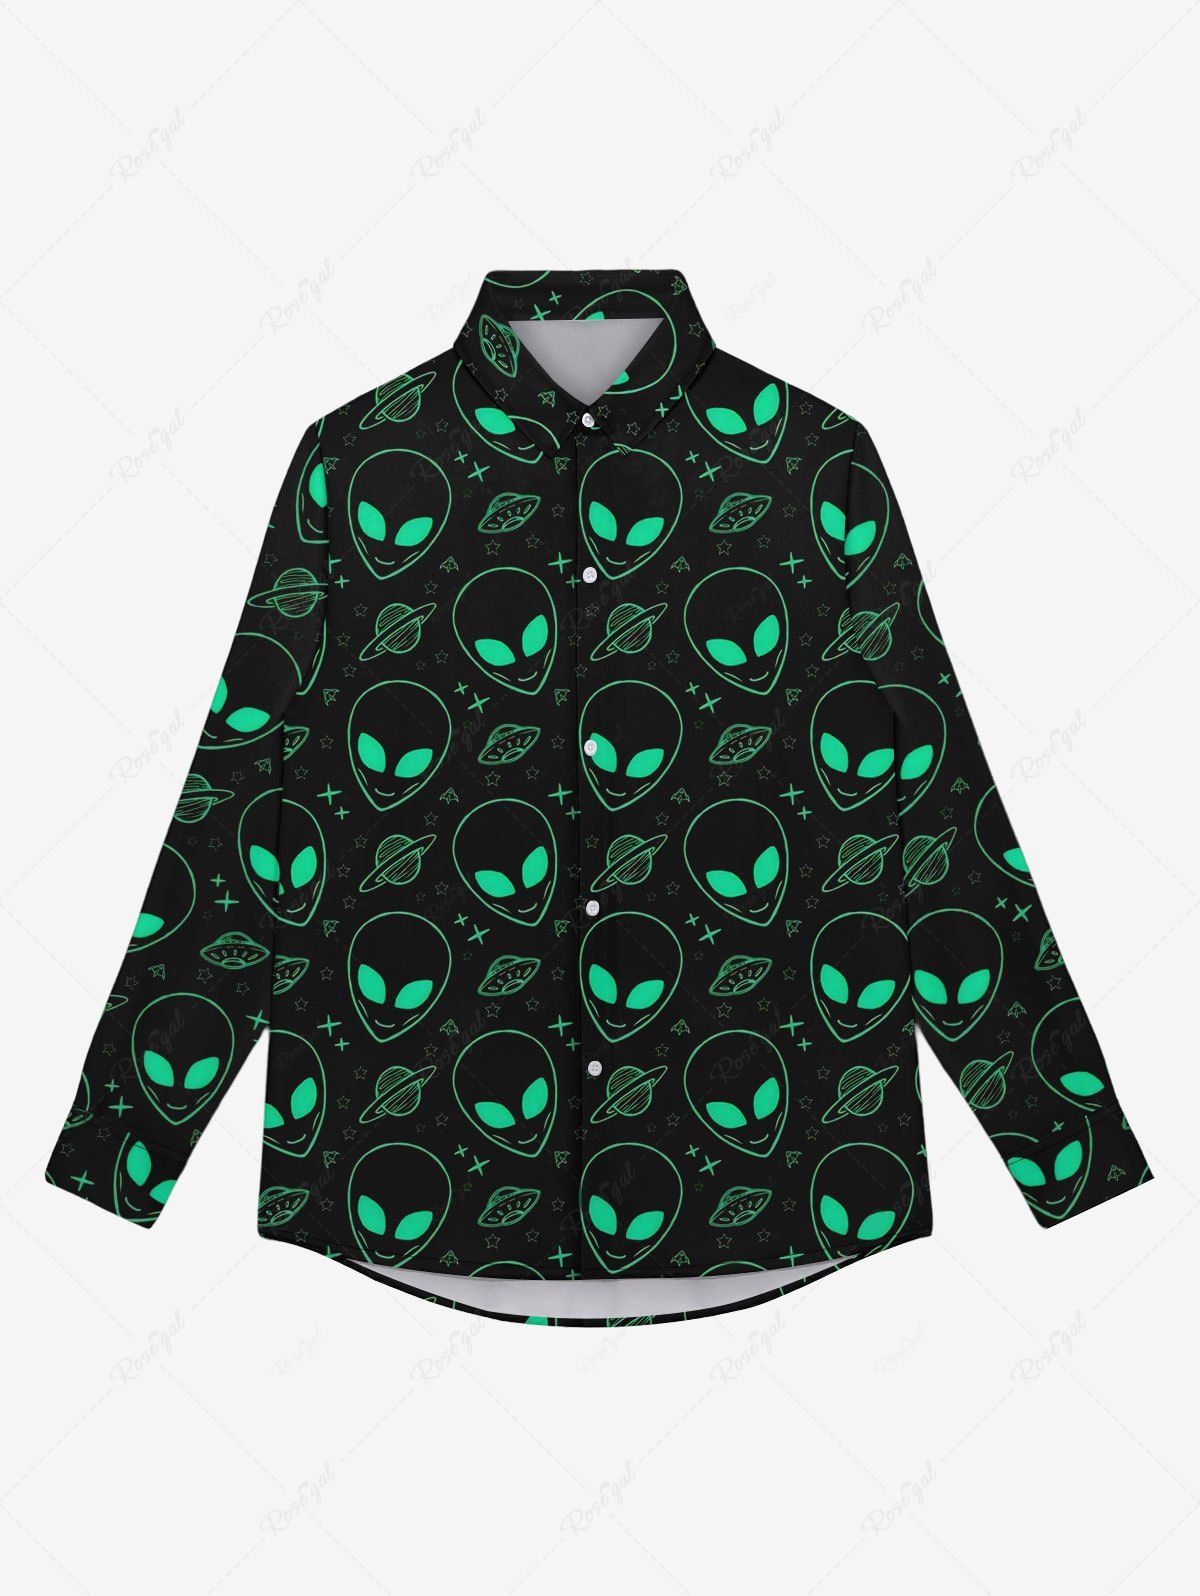 Hot Gothic Turn-down Collar Alien UFO Planet Print Buttons Shirt For Men  